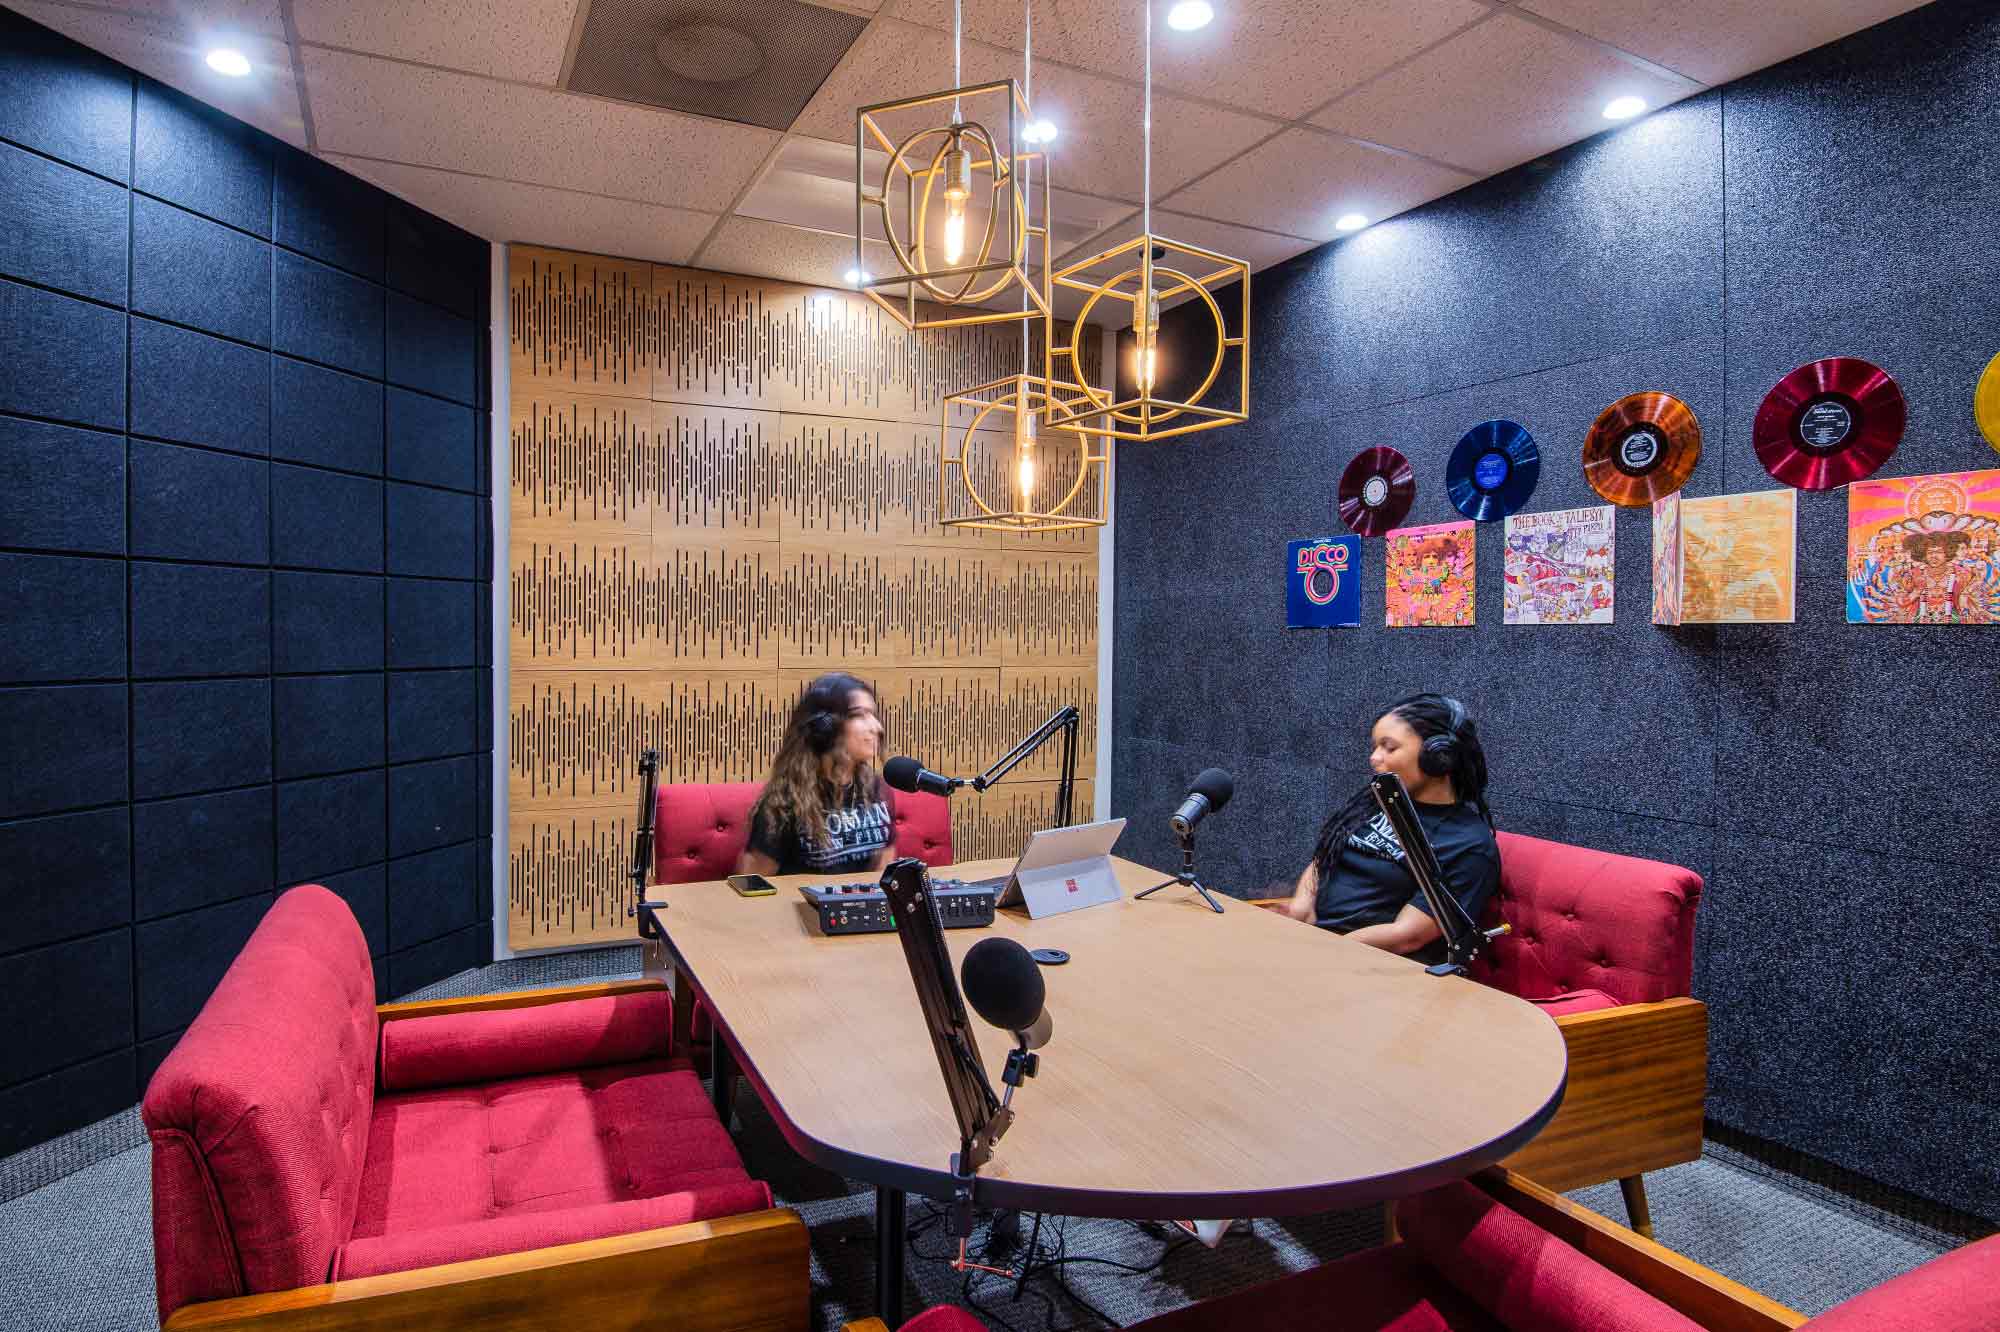 podcast room with audio equipment provided